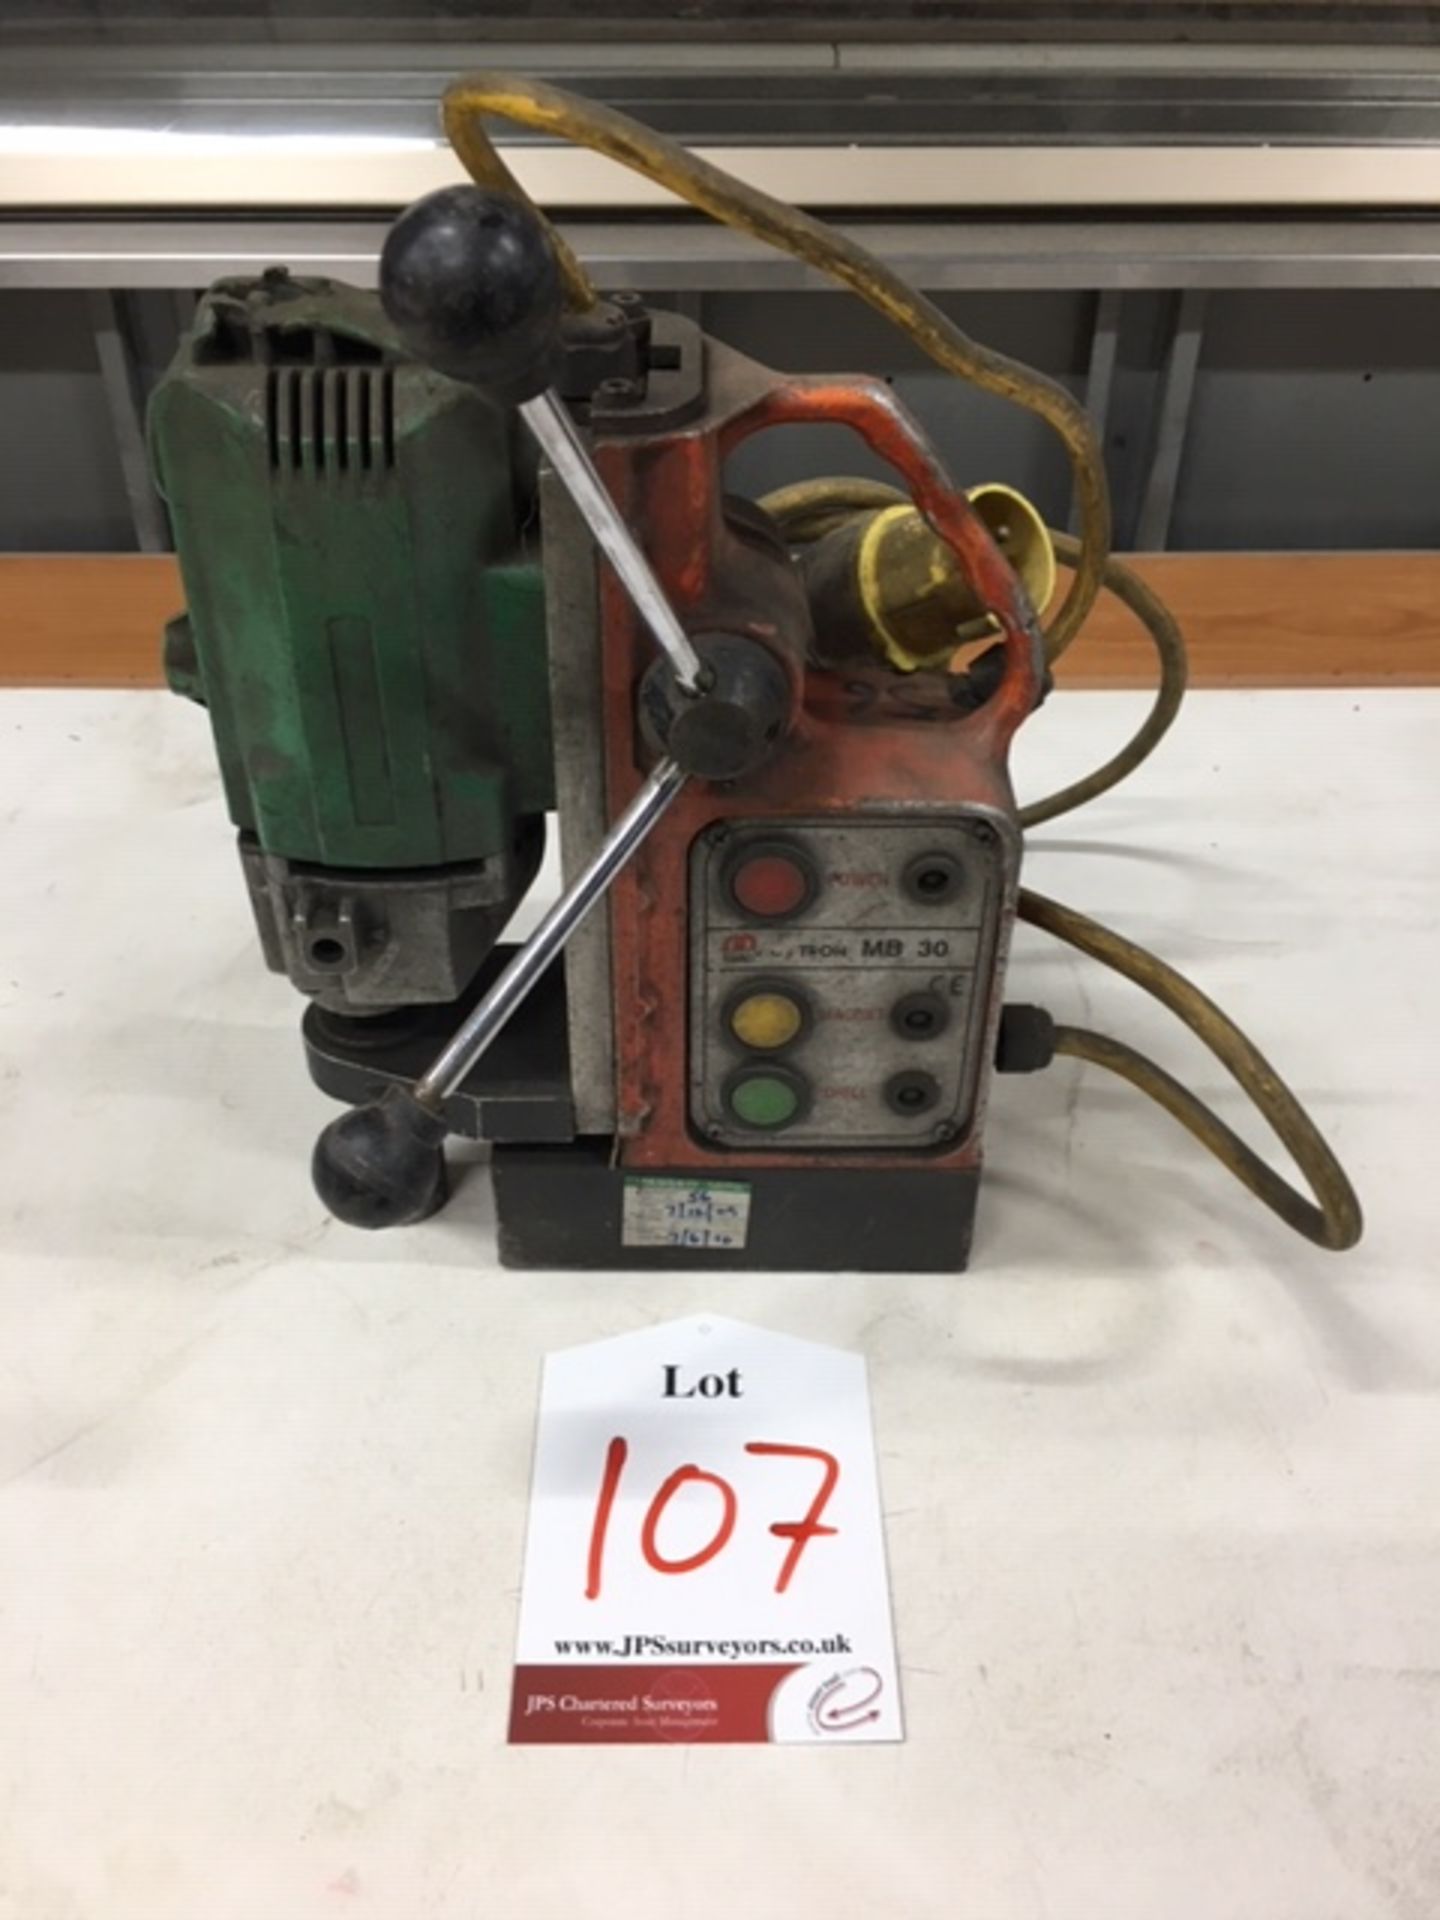 Magtron magnet drill